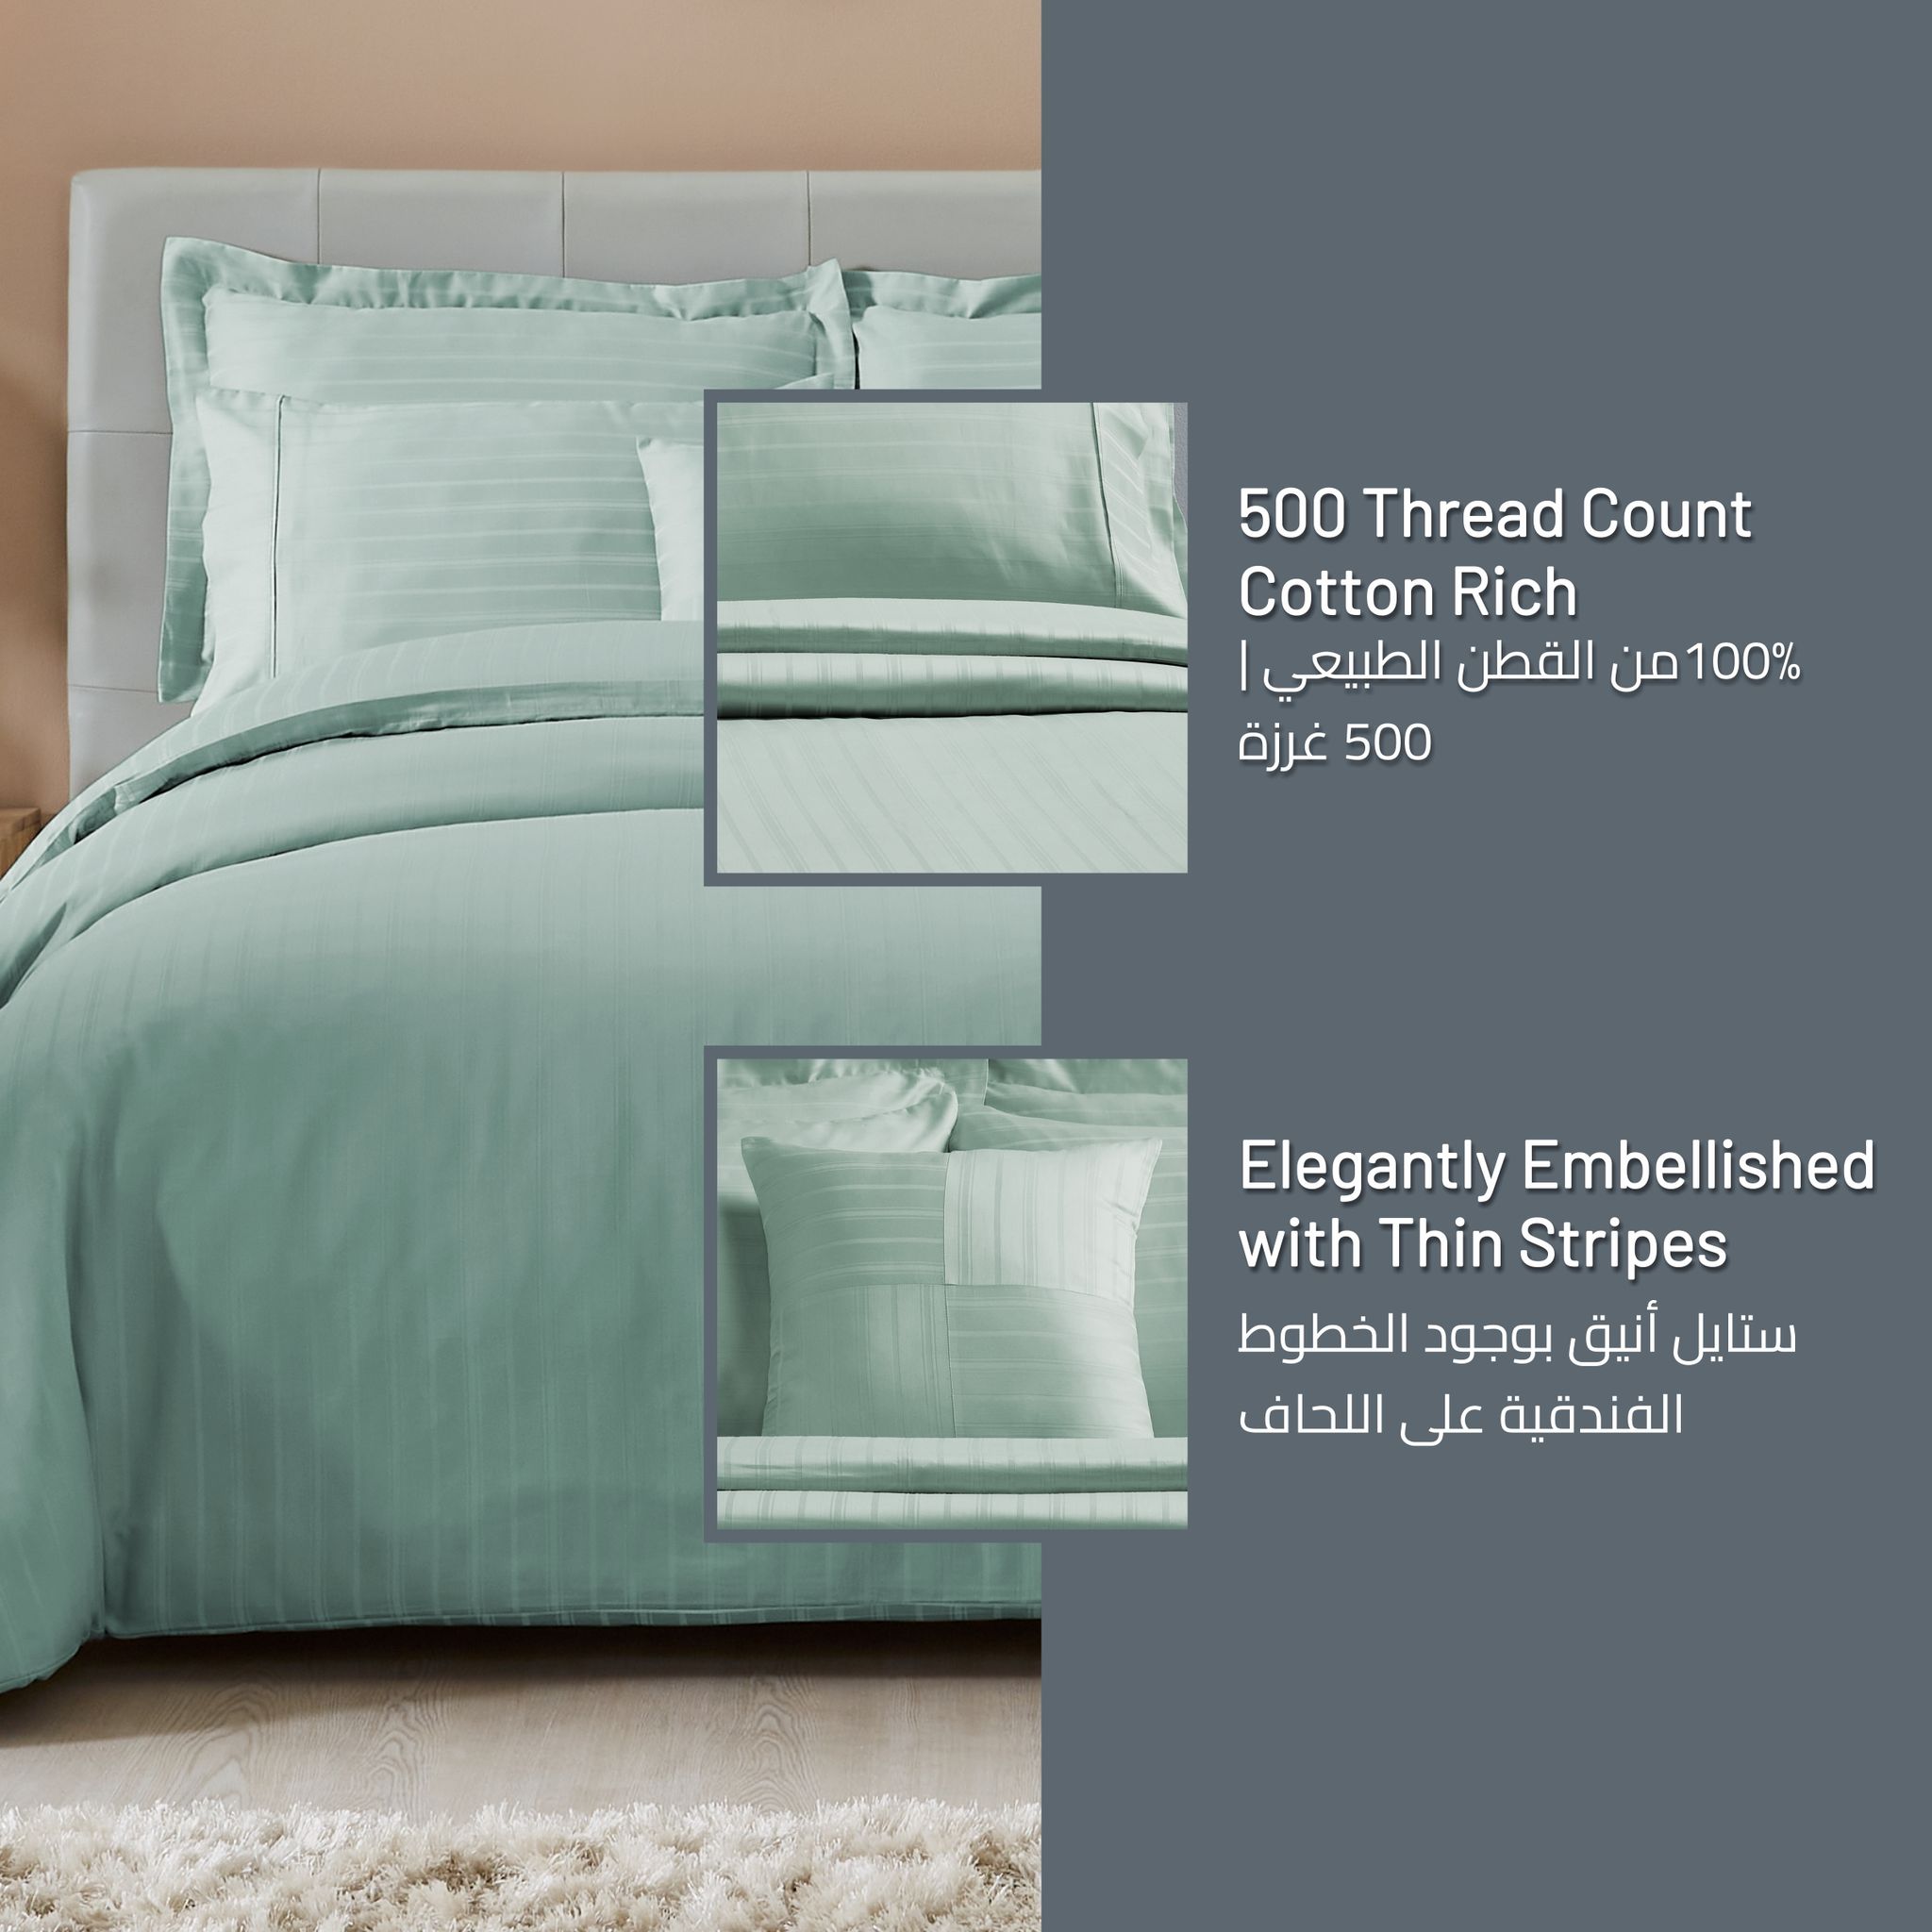 3-Piece Hotel Style Duvet Cover Cotton Rich, 500 Thread Count Hotel Satin Striped, King Size, Sage